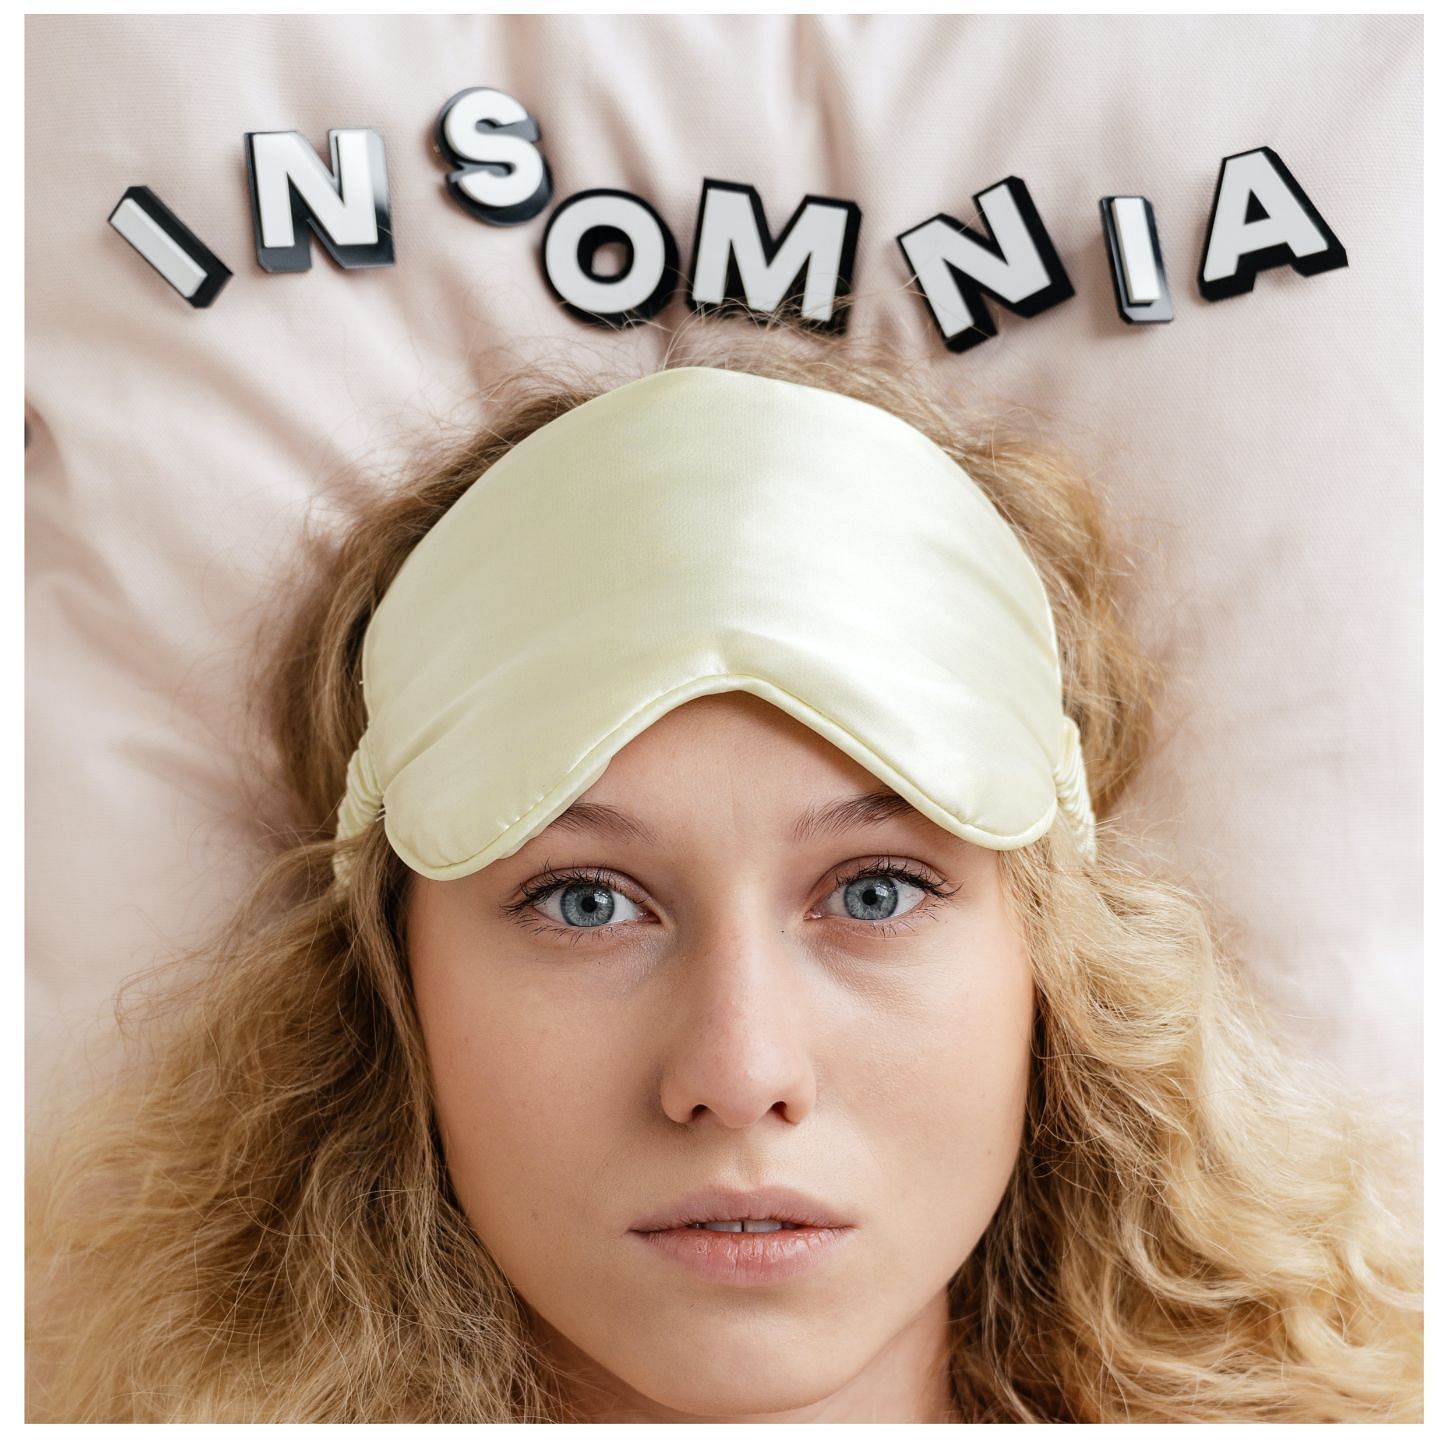 What do you think causes insomnia? (Image via Pexels/ Shvets Production)